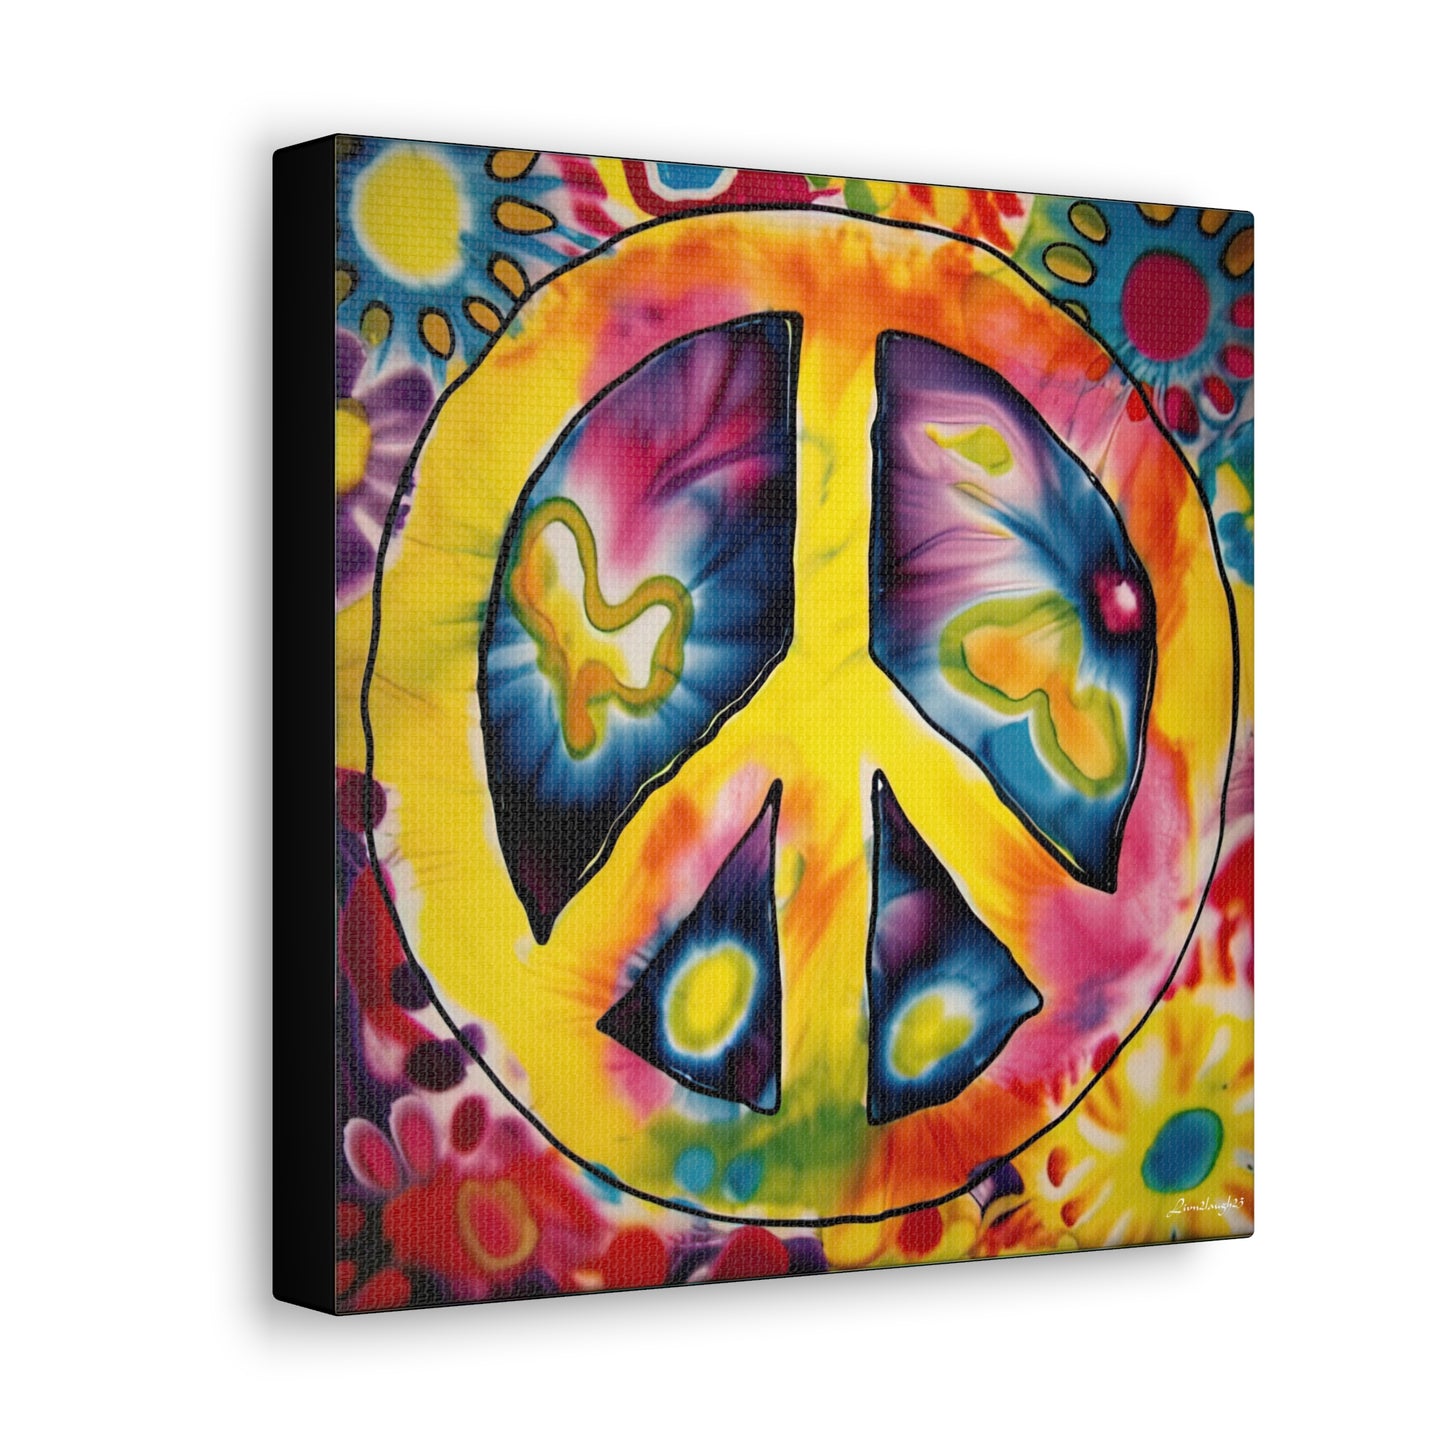 Coolio Tie Dye Hippie Peace Sign 7 Canvas Gallery Wraps